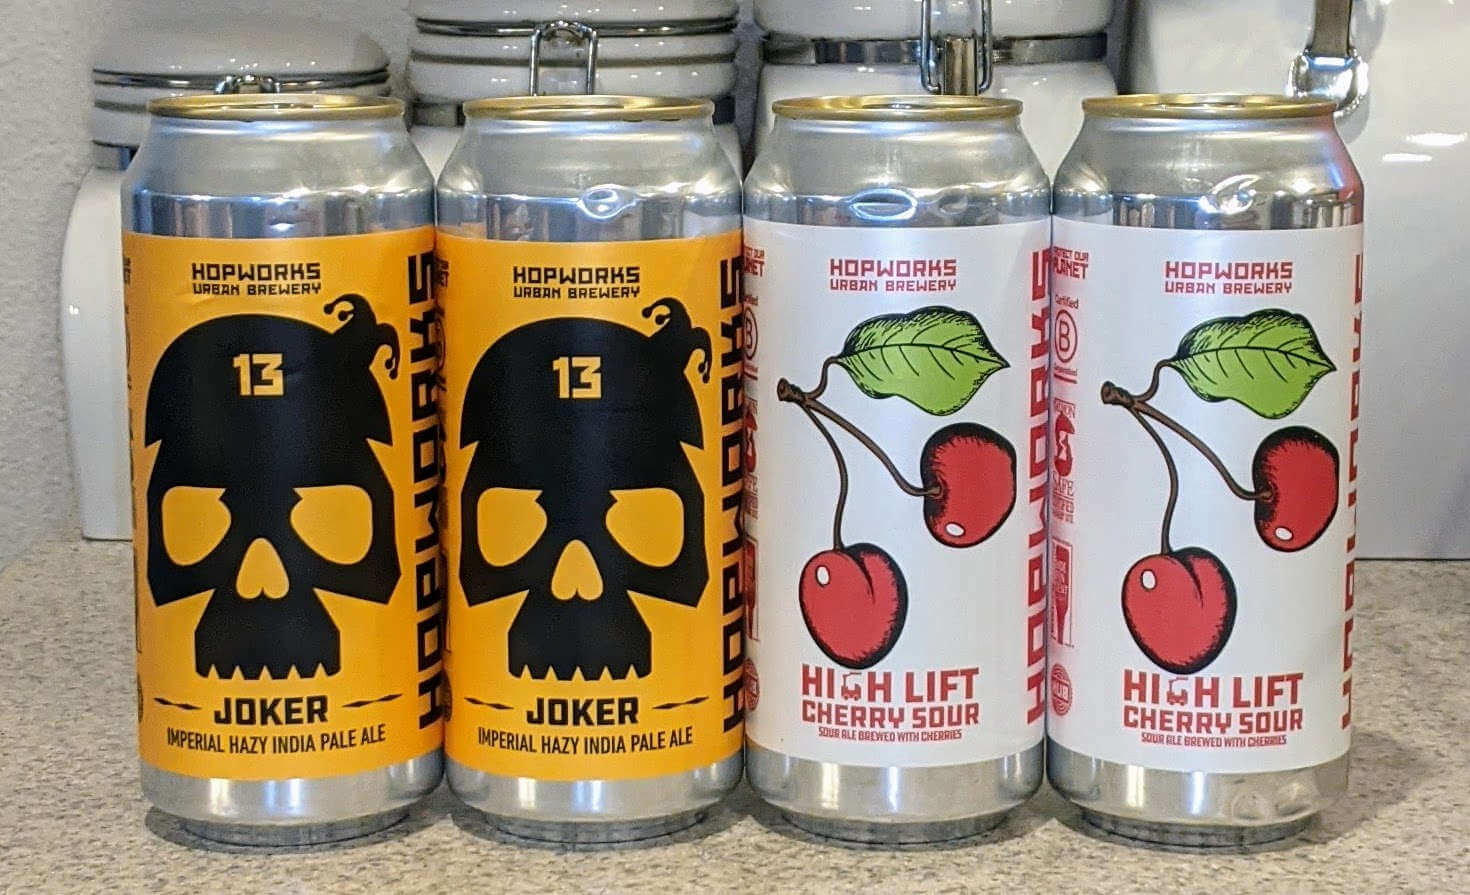 Received: Hopworks Urban Brewery Joker Imperial Hazy IPA, High Lift Cherry Sour